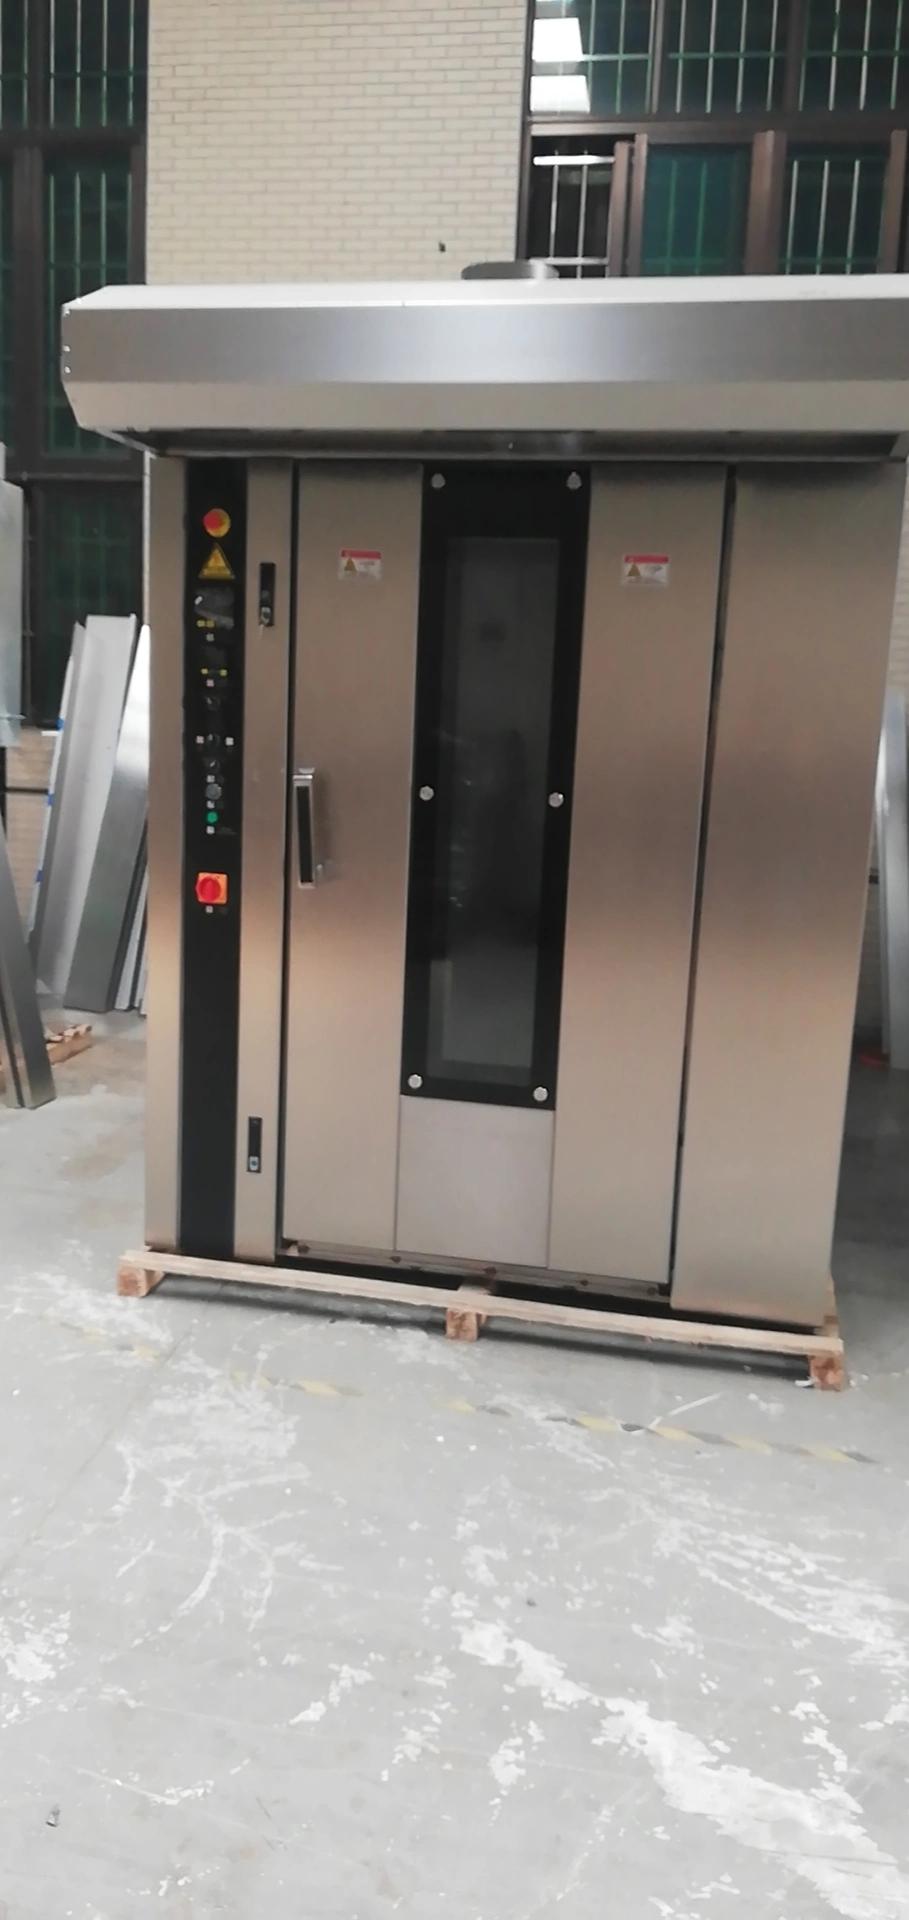 12/16/32/64 Rotary Oven Gas Oven Electric Oven Diesel Oven Commercial Oven Bakery Oven for Sale with CE